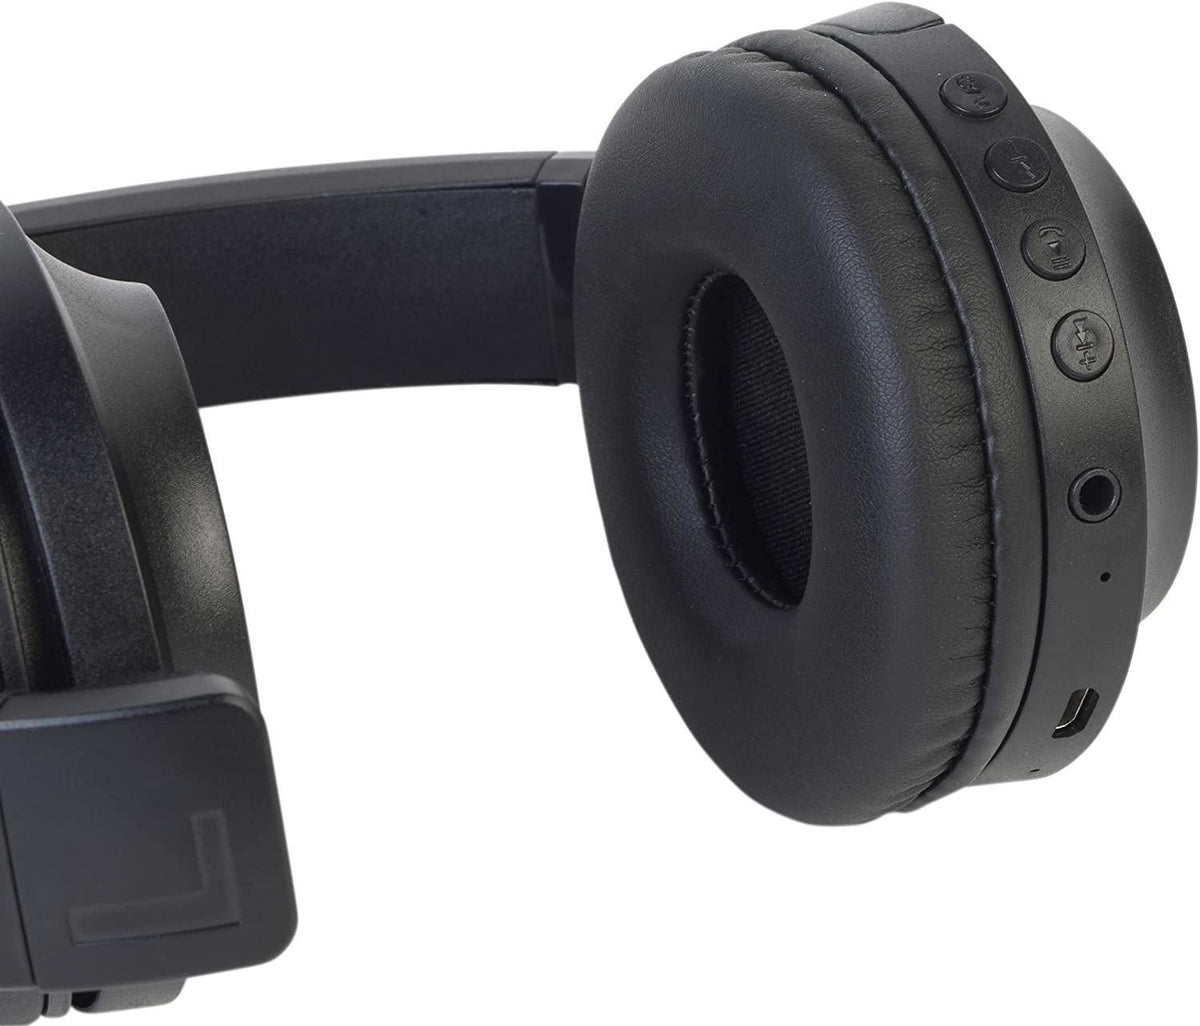 Intempo Office Bluetooth Headset with Mic - Choice Stores